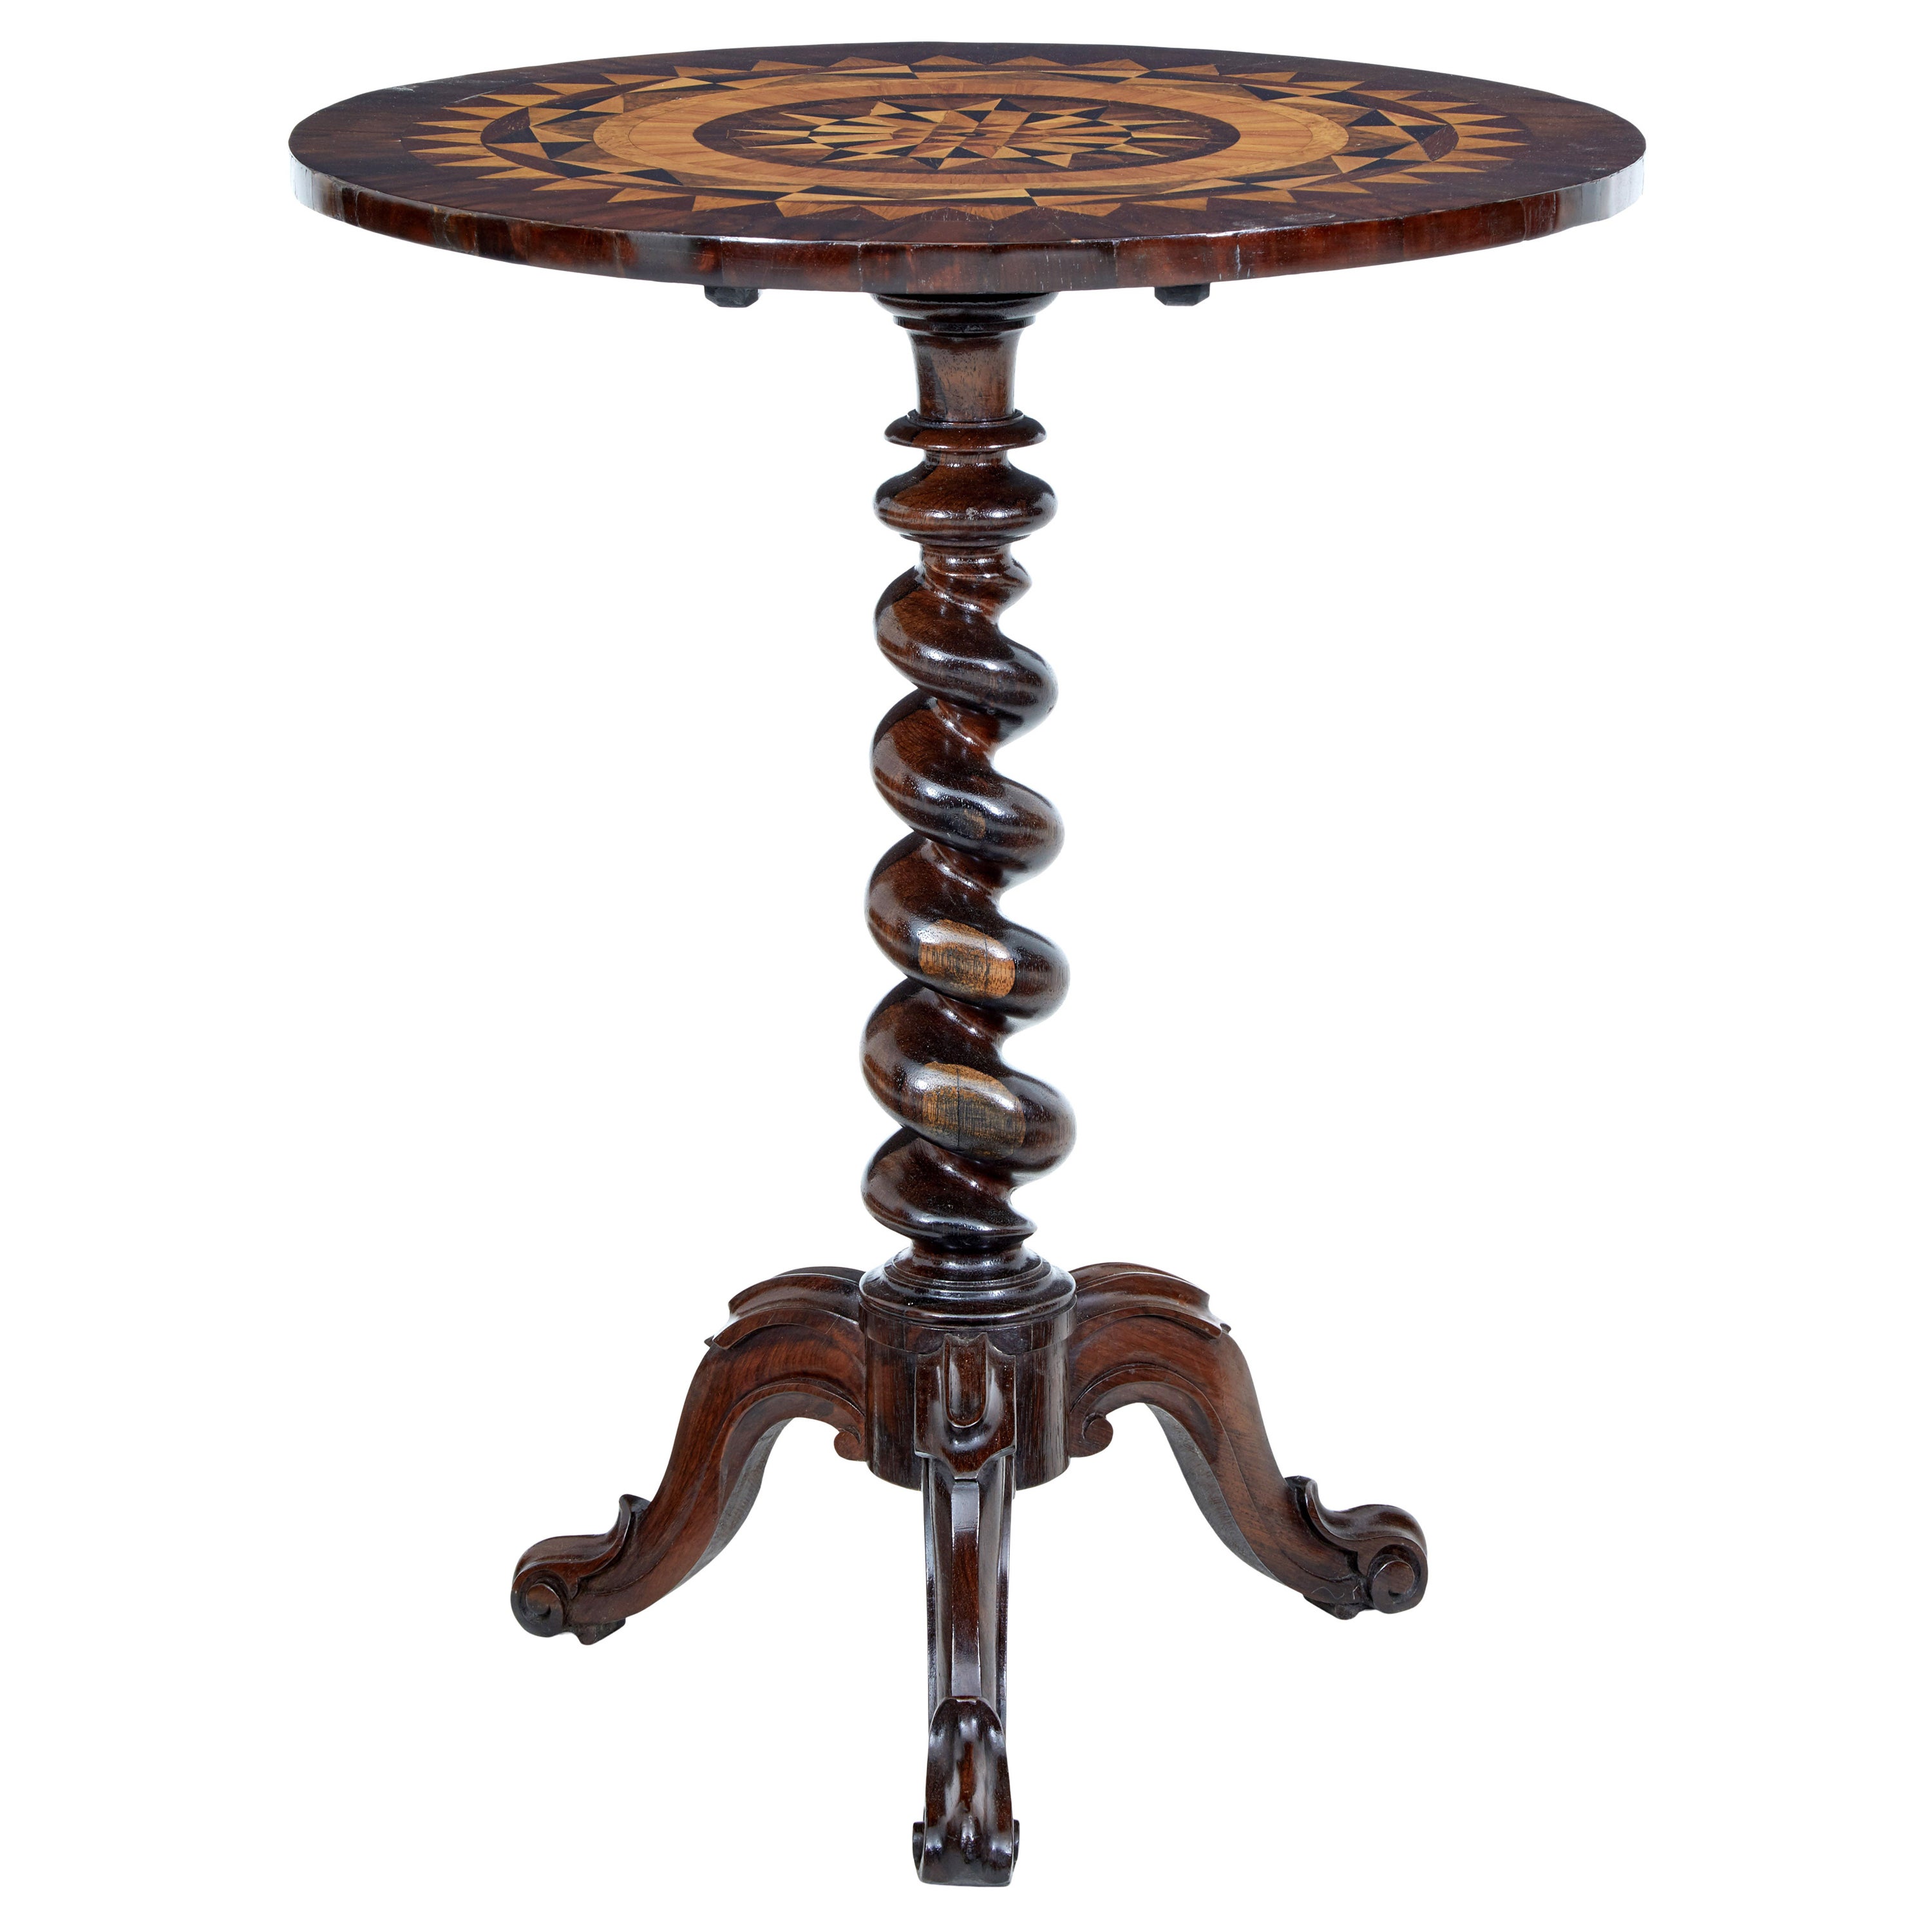 Early Victorian 19th Century Walnut Inlaid Tilt Top Occasional Table